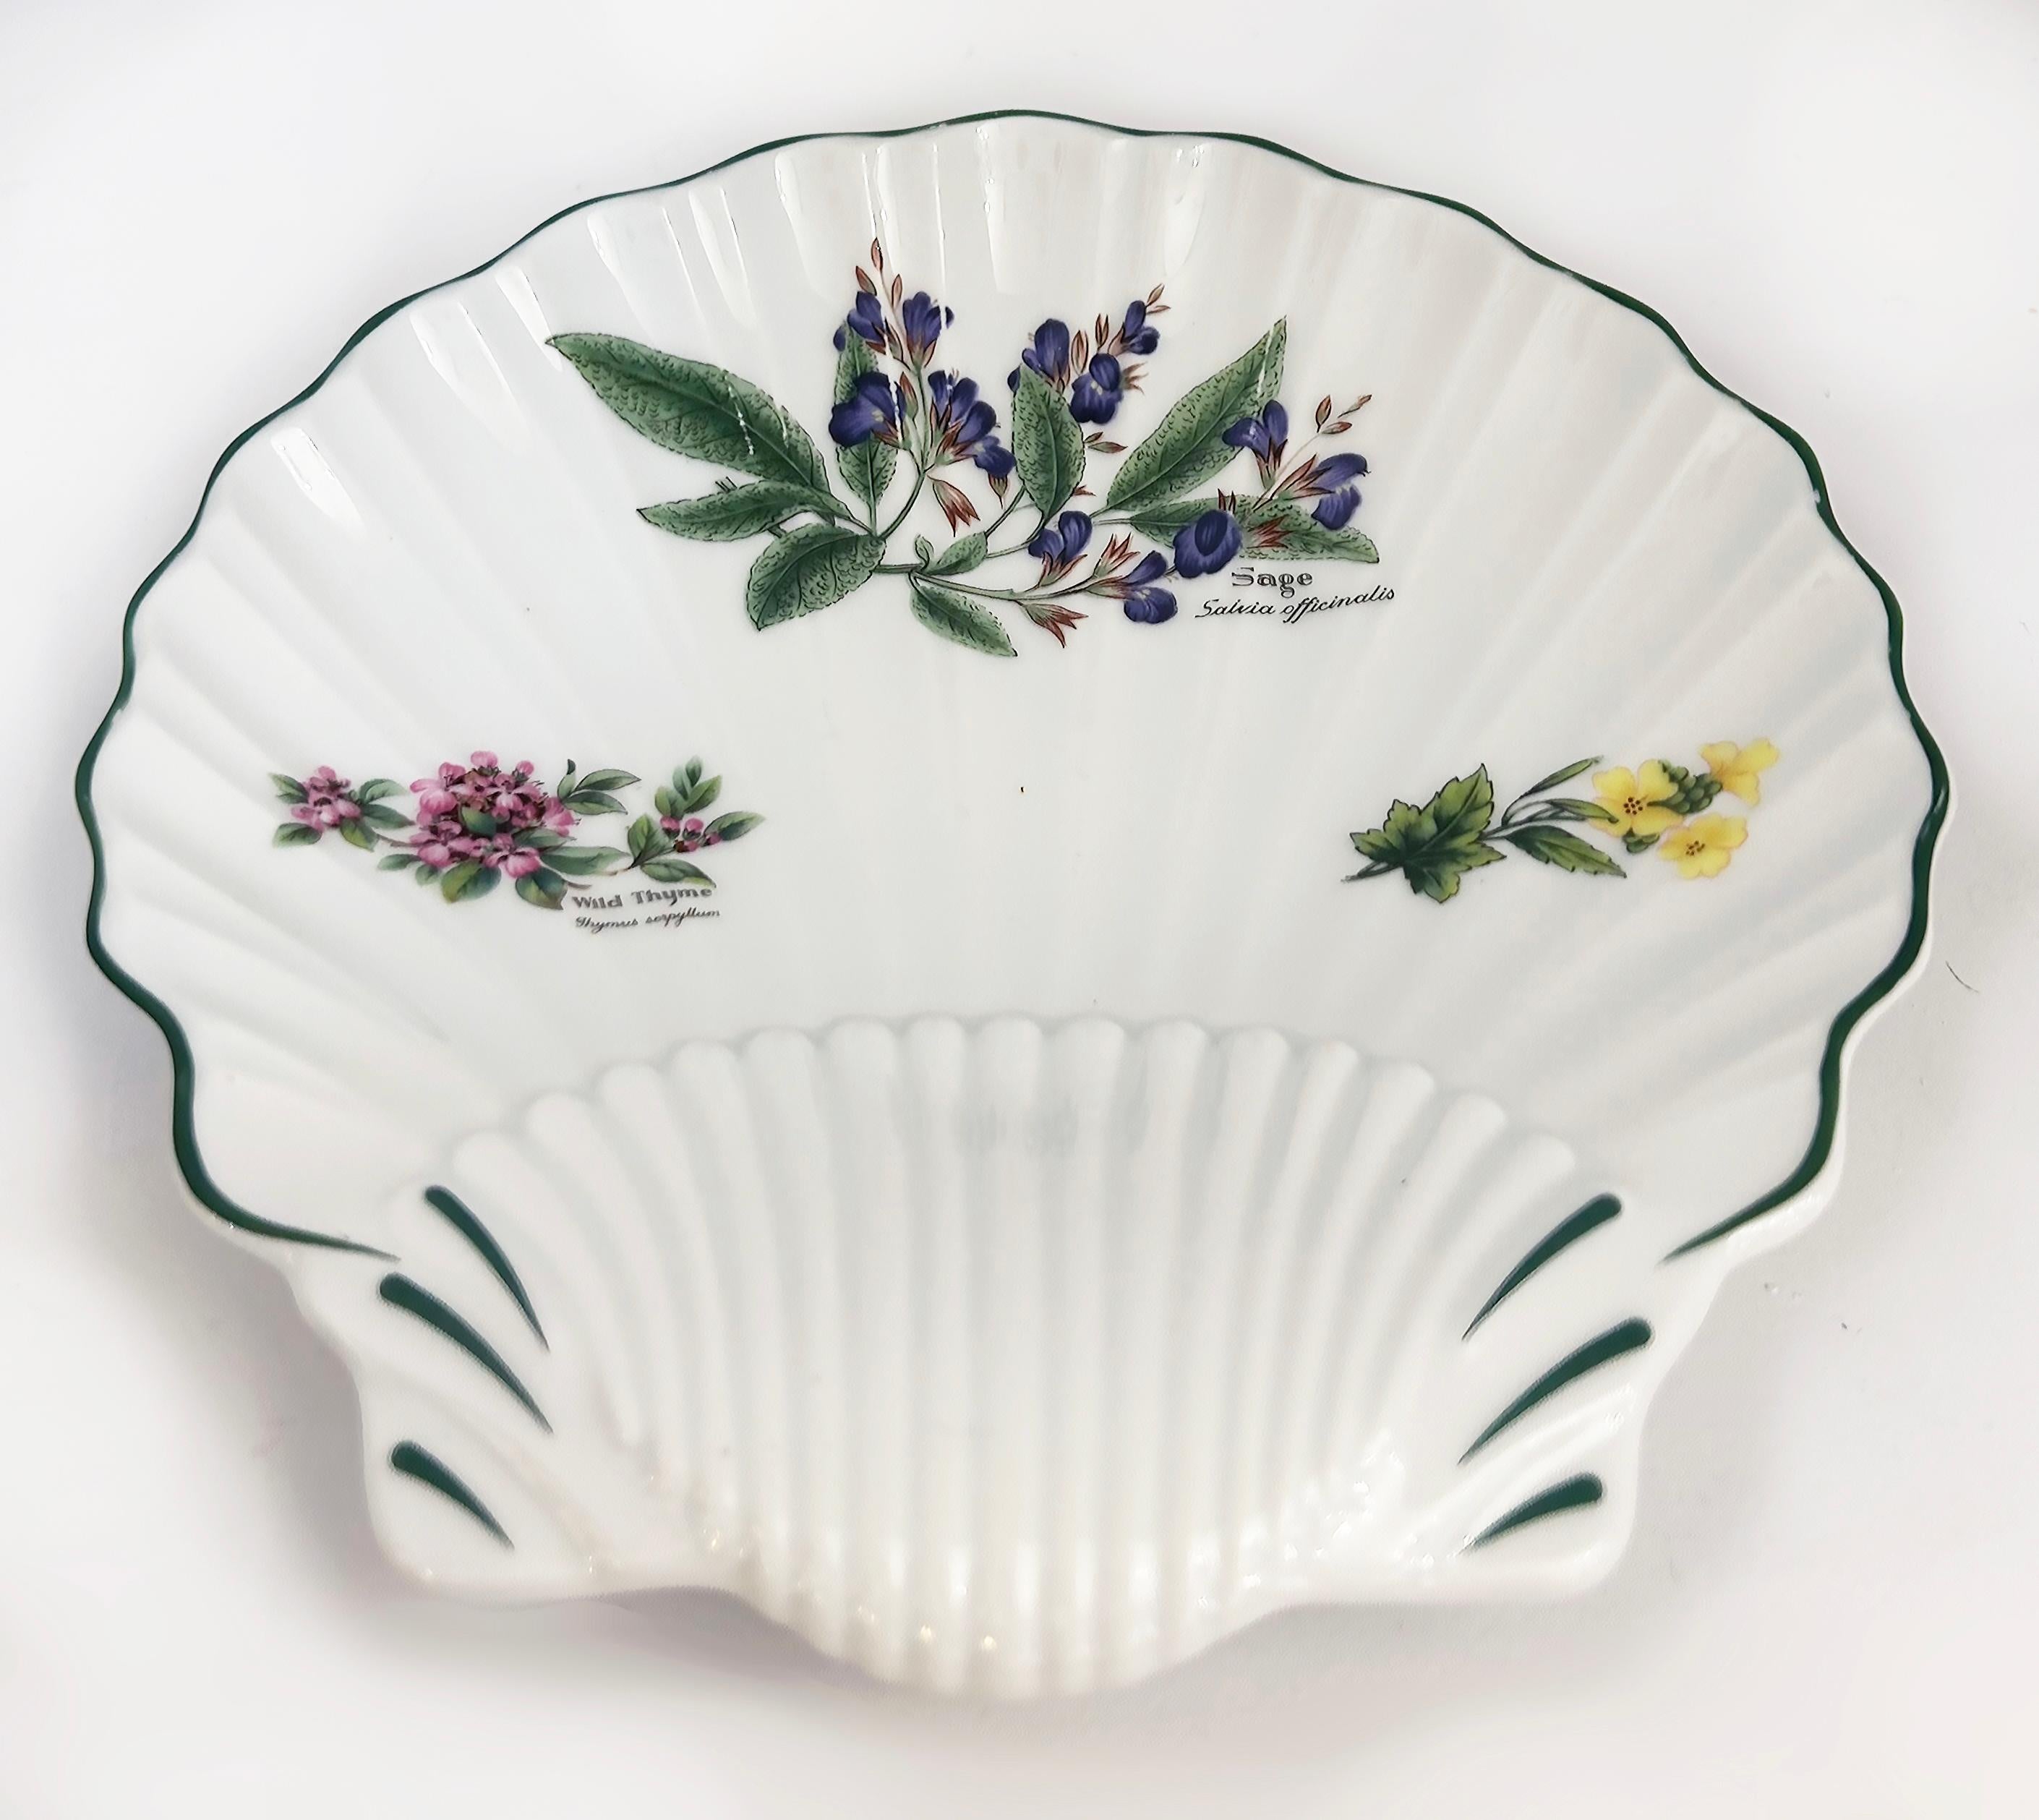 Royal Worcester Porcelain Wild Thyme Sage Plates Pair, England 

Offered for sale is a pair of Royal Worcester fine porcelain decorative scalloped edge shell plates from the 